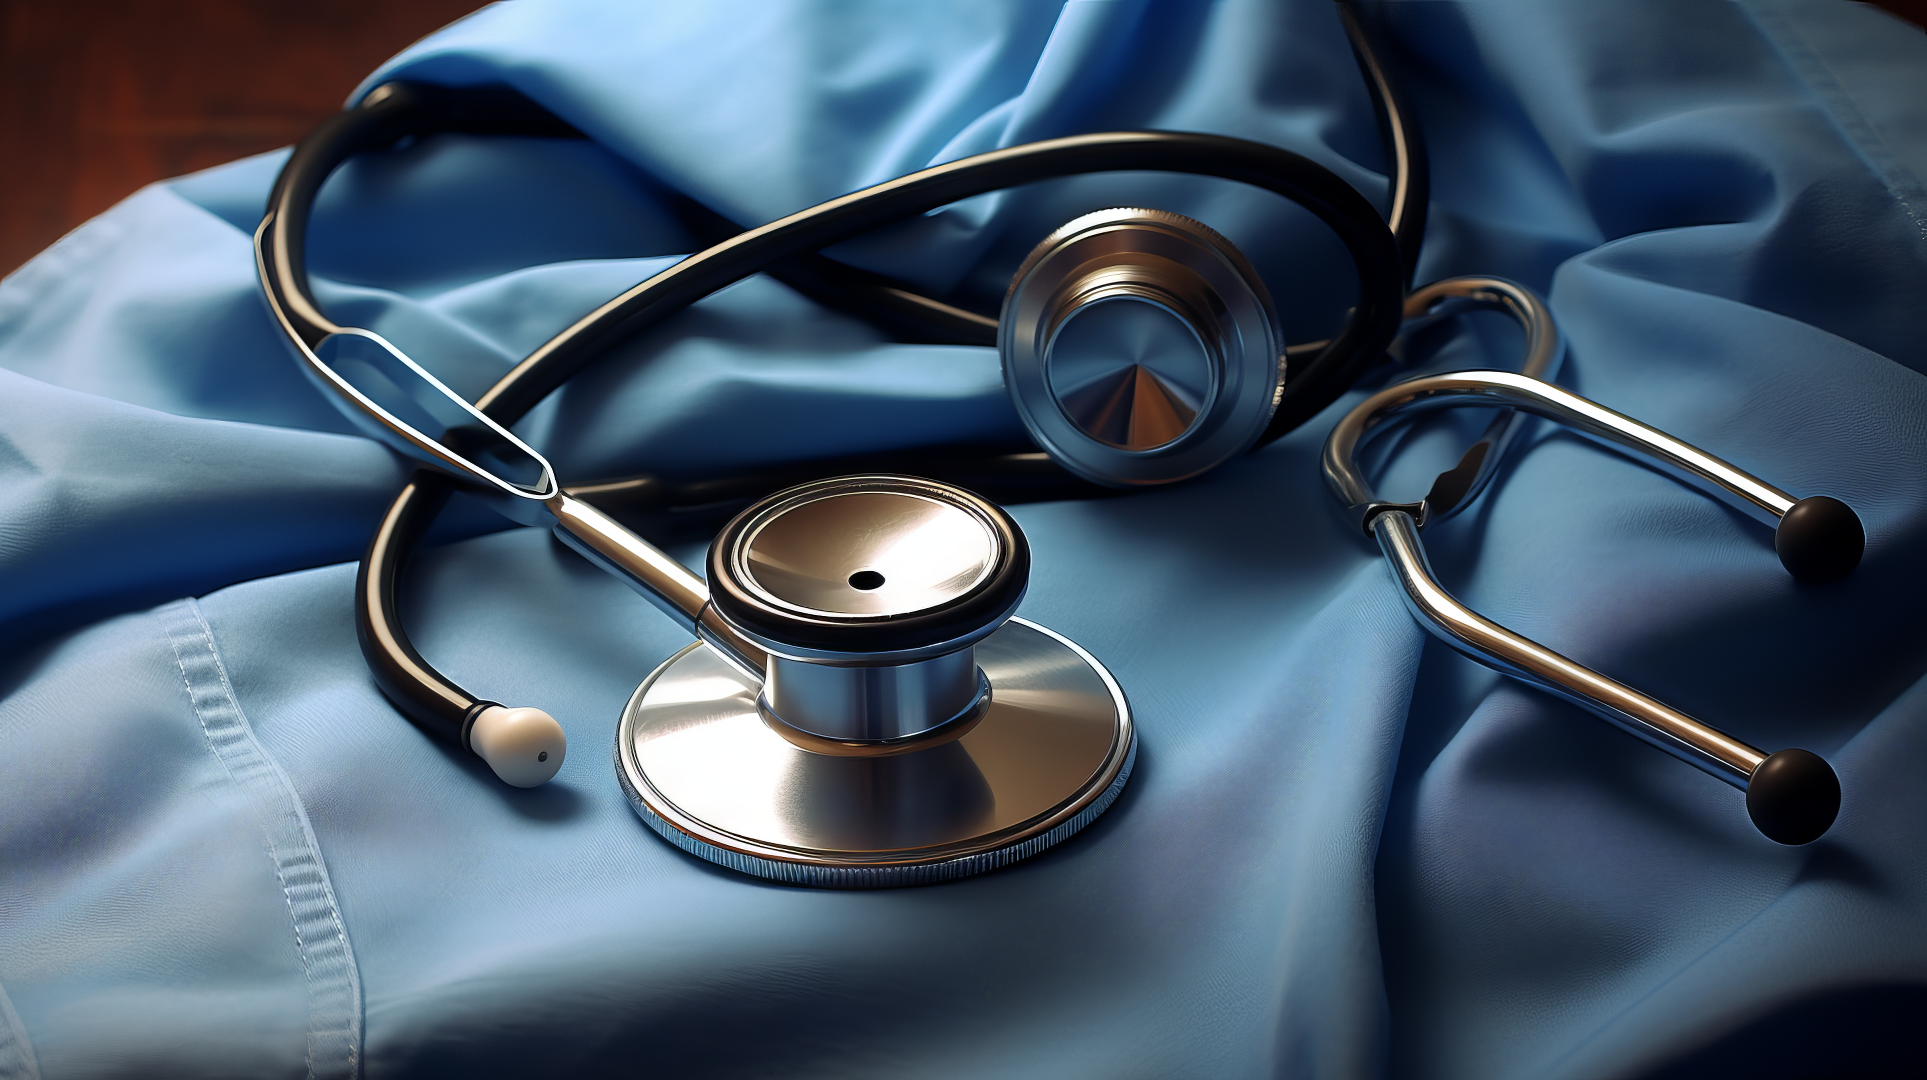 HD desktop wallpaper featuring a medical stethoscope on a blue fabric, symbolizing healthcare and medical professionals.